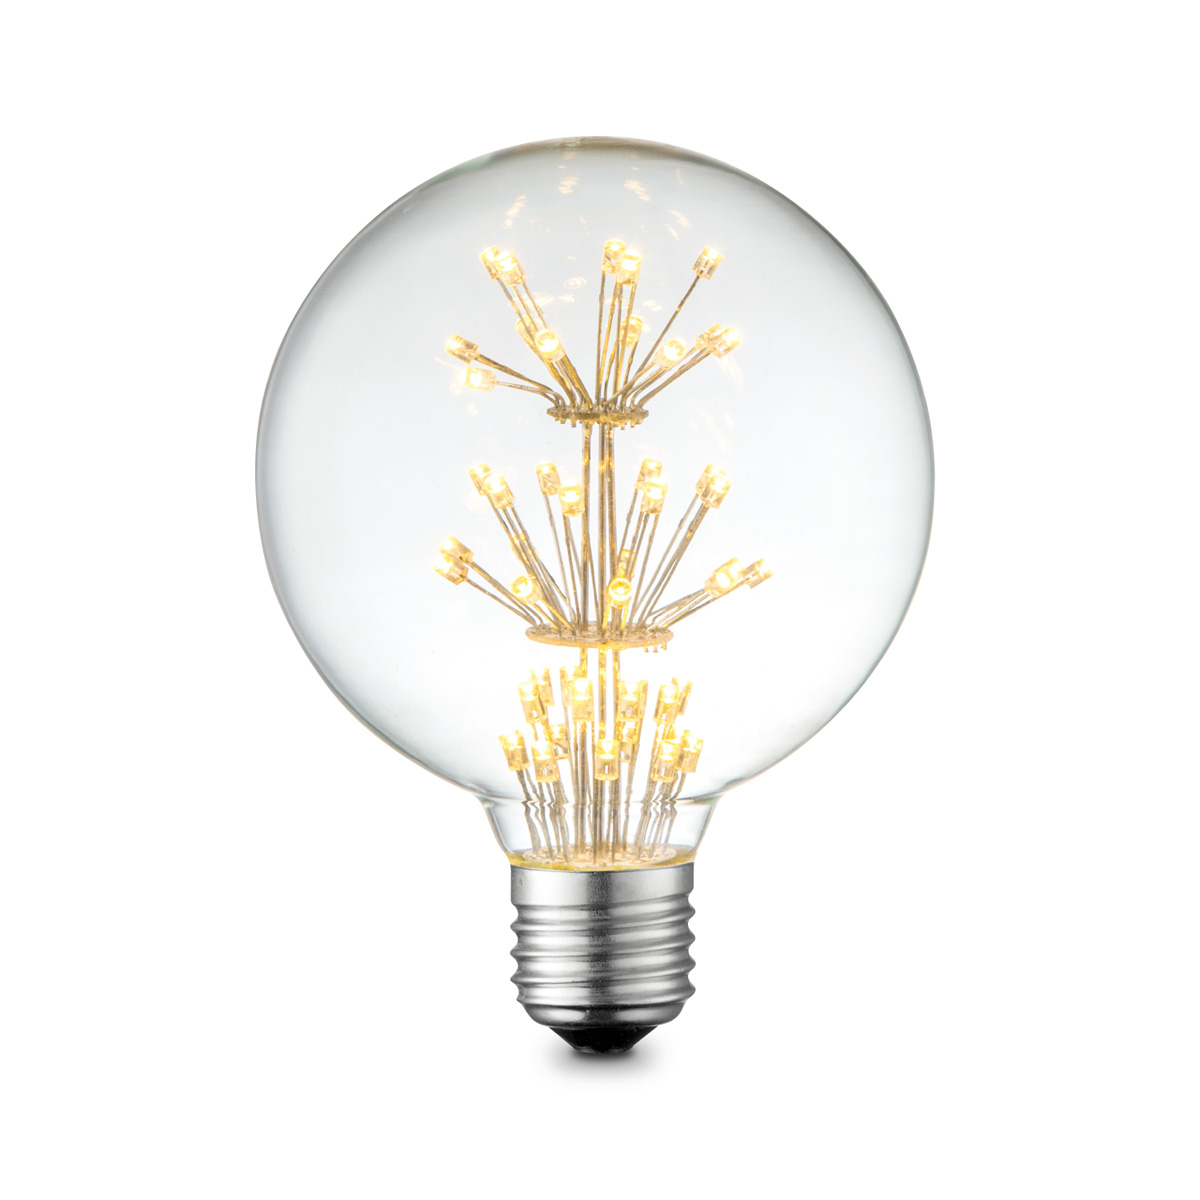 Tangla lighting - TLB-8084-05CL - LED Light Bulb Crystal filament - G95 1.5W clear - non dimmable - E27